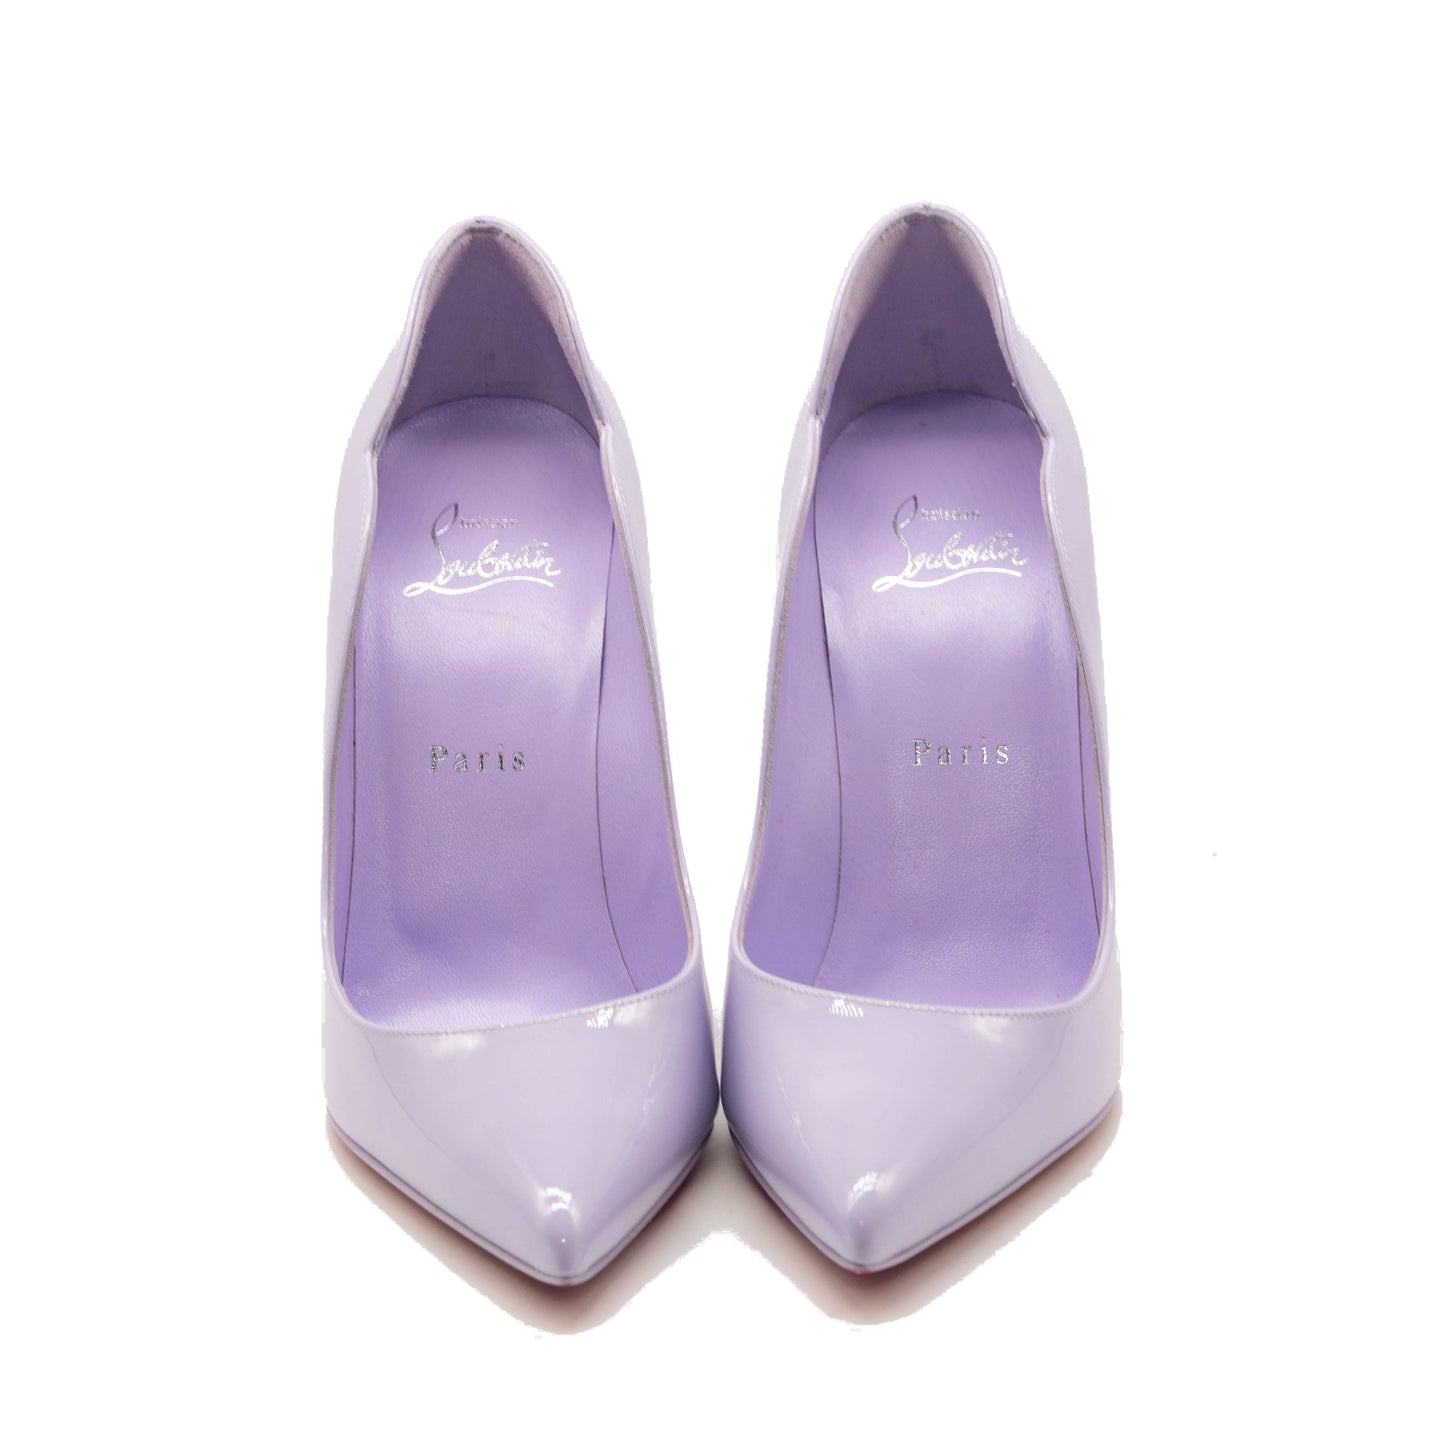 NEW Christian Louboutin Hot Chick Scallop Pointed Toe Pump Lilac EU 39